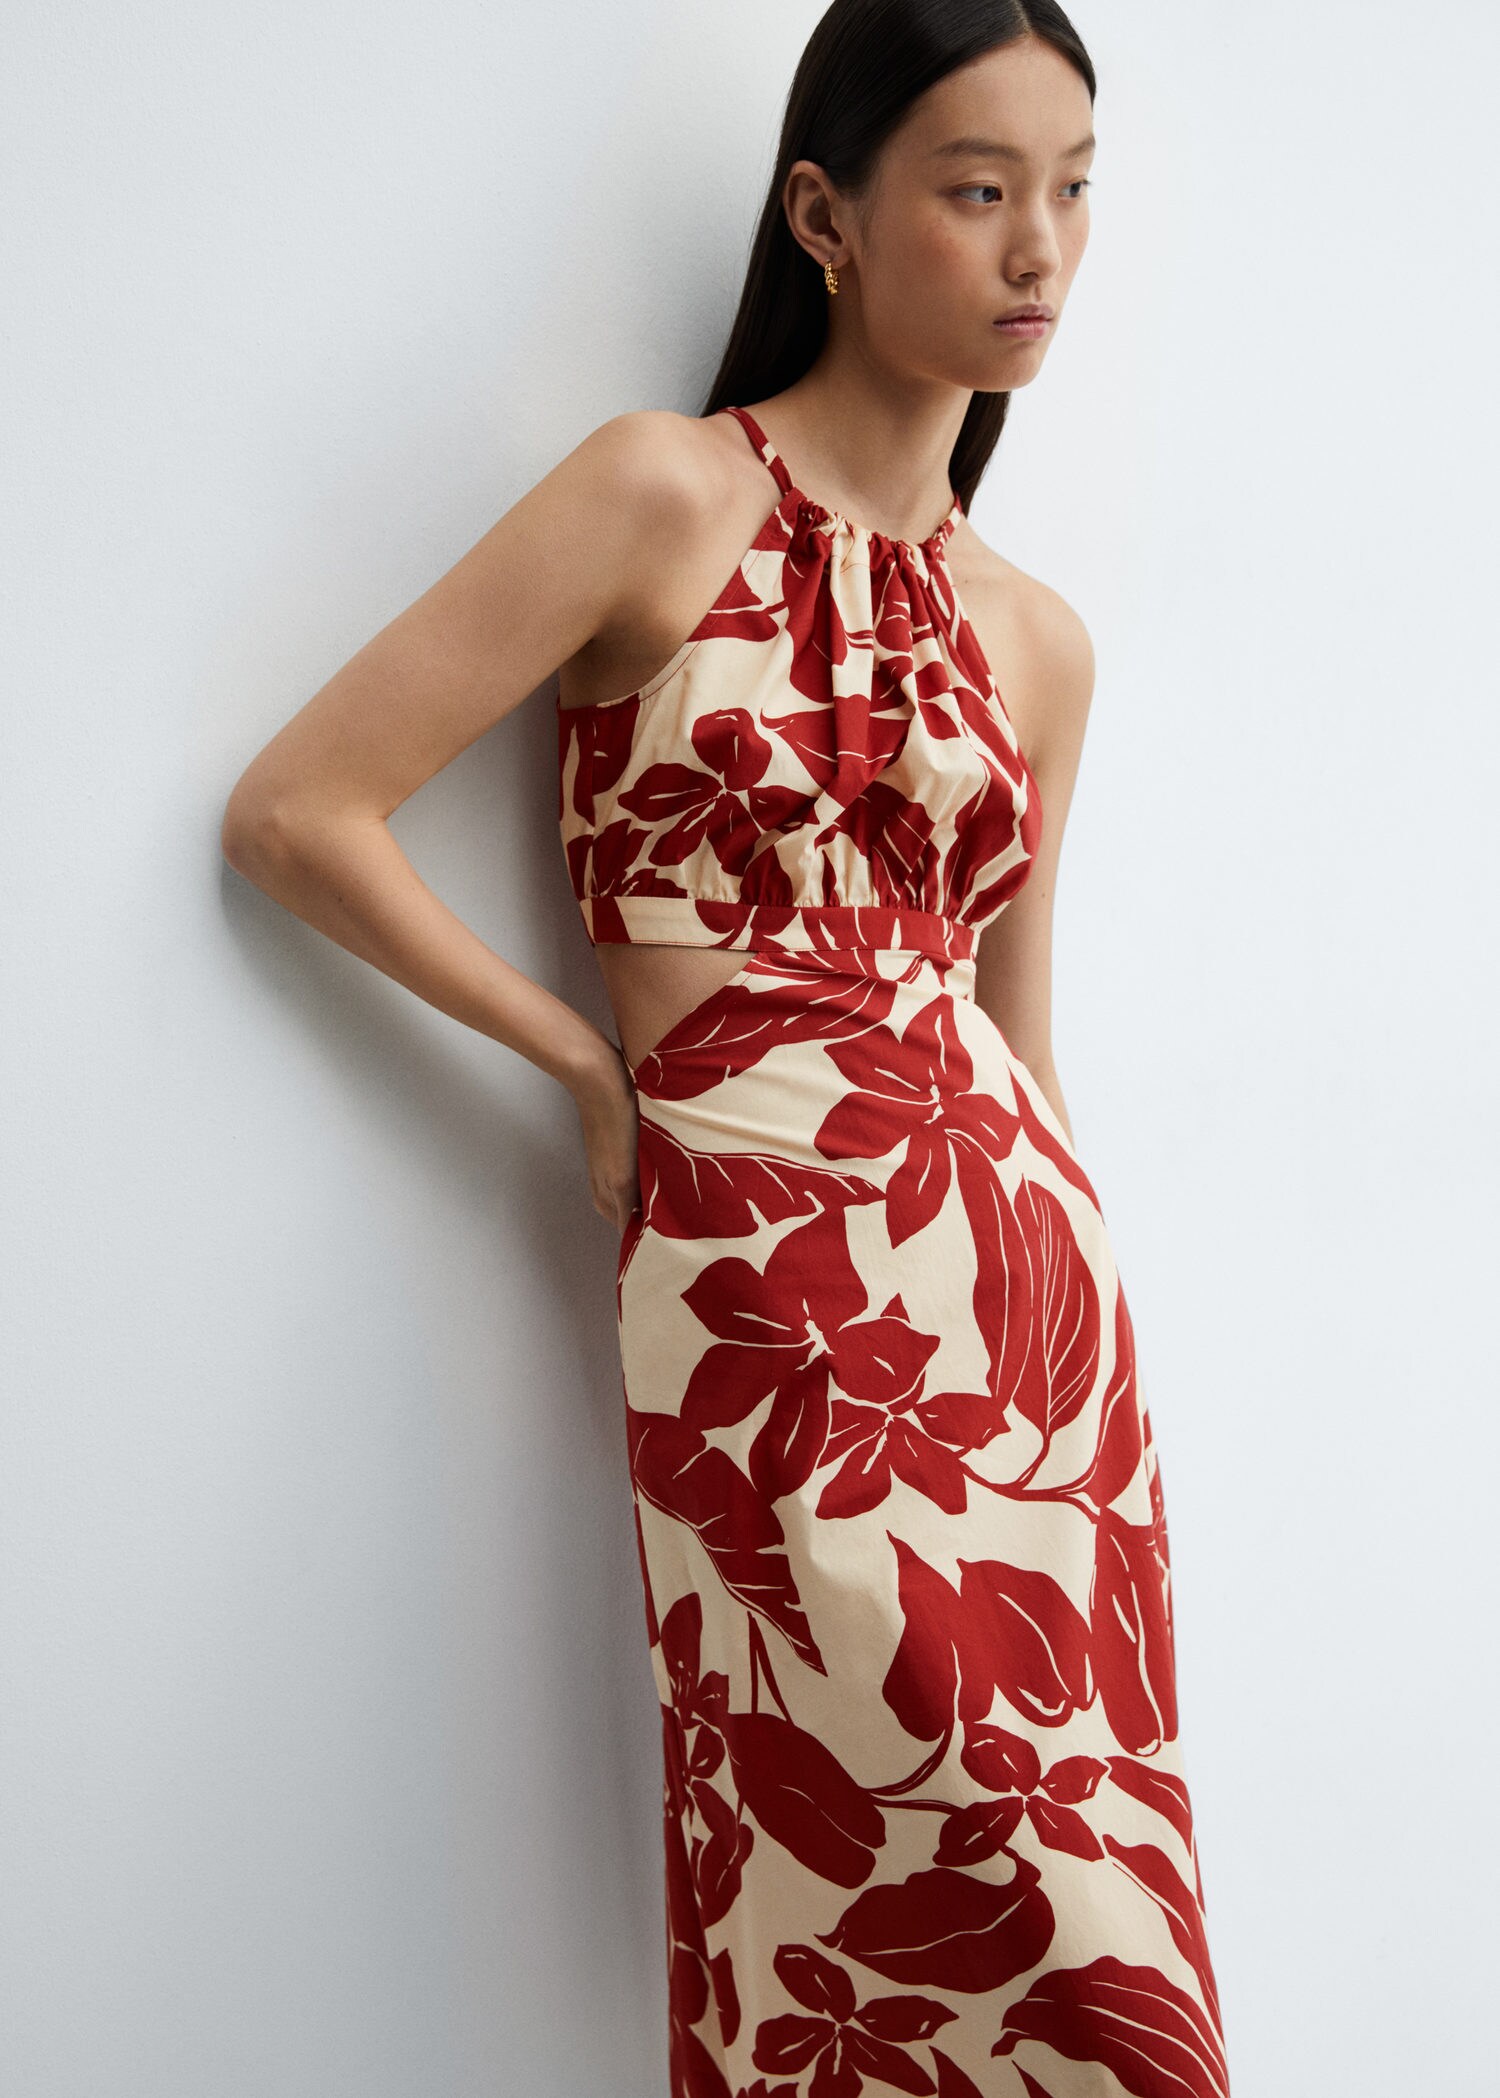 Floral dress with cut-out